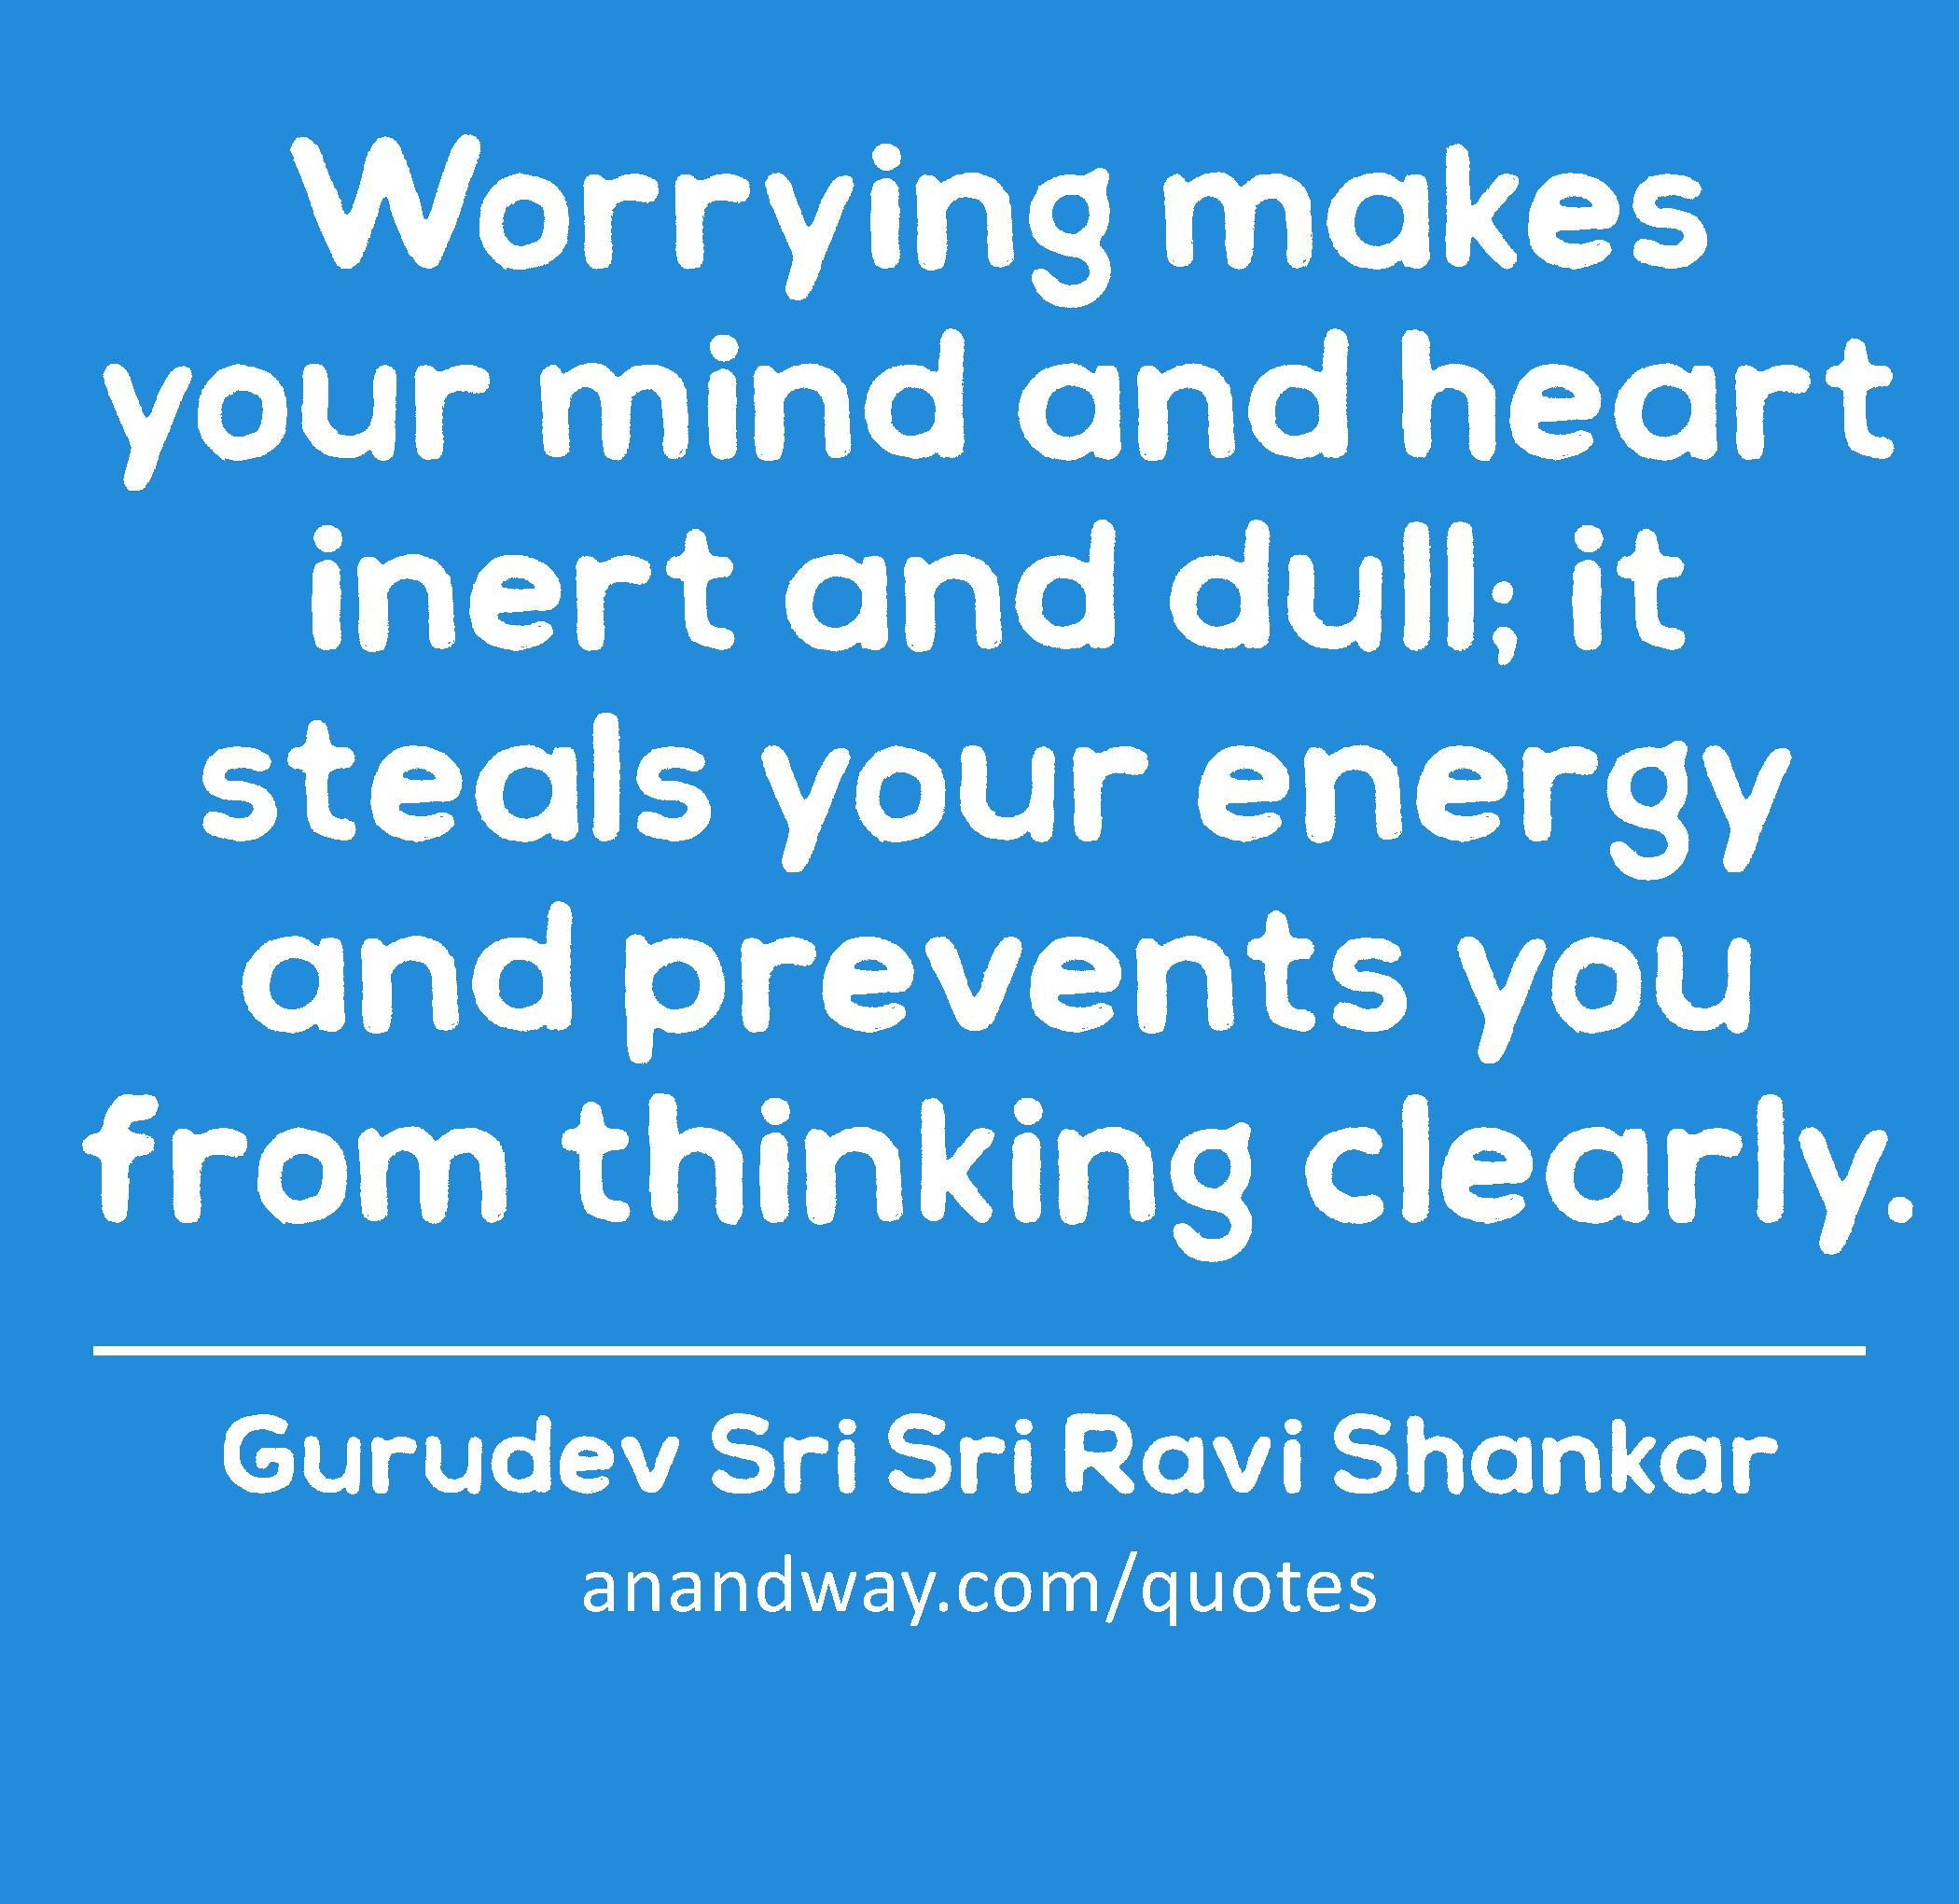 Worrying makes your mind and heart inert and dull; it steals your energy and prevents you from
 -Gurudev Sri Sri Ravi Shankar